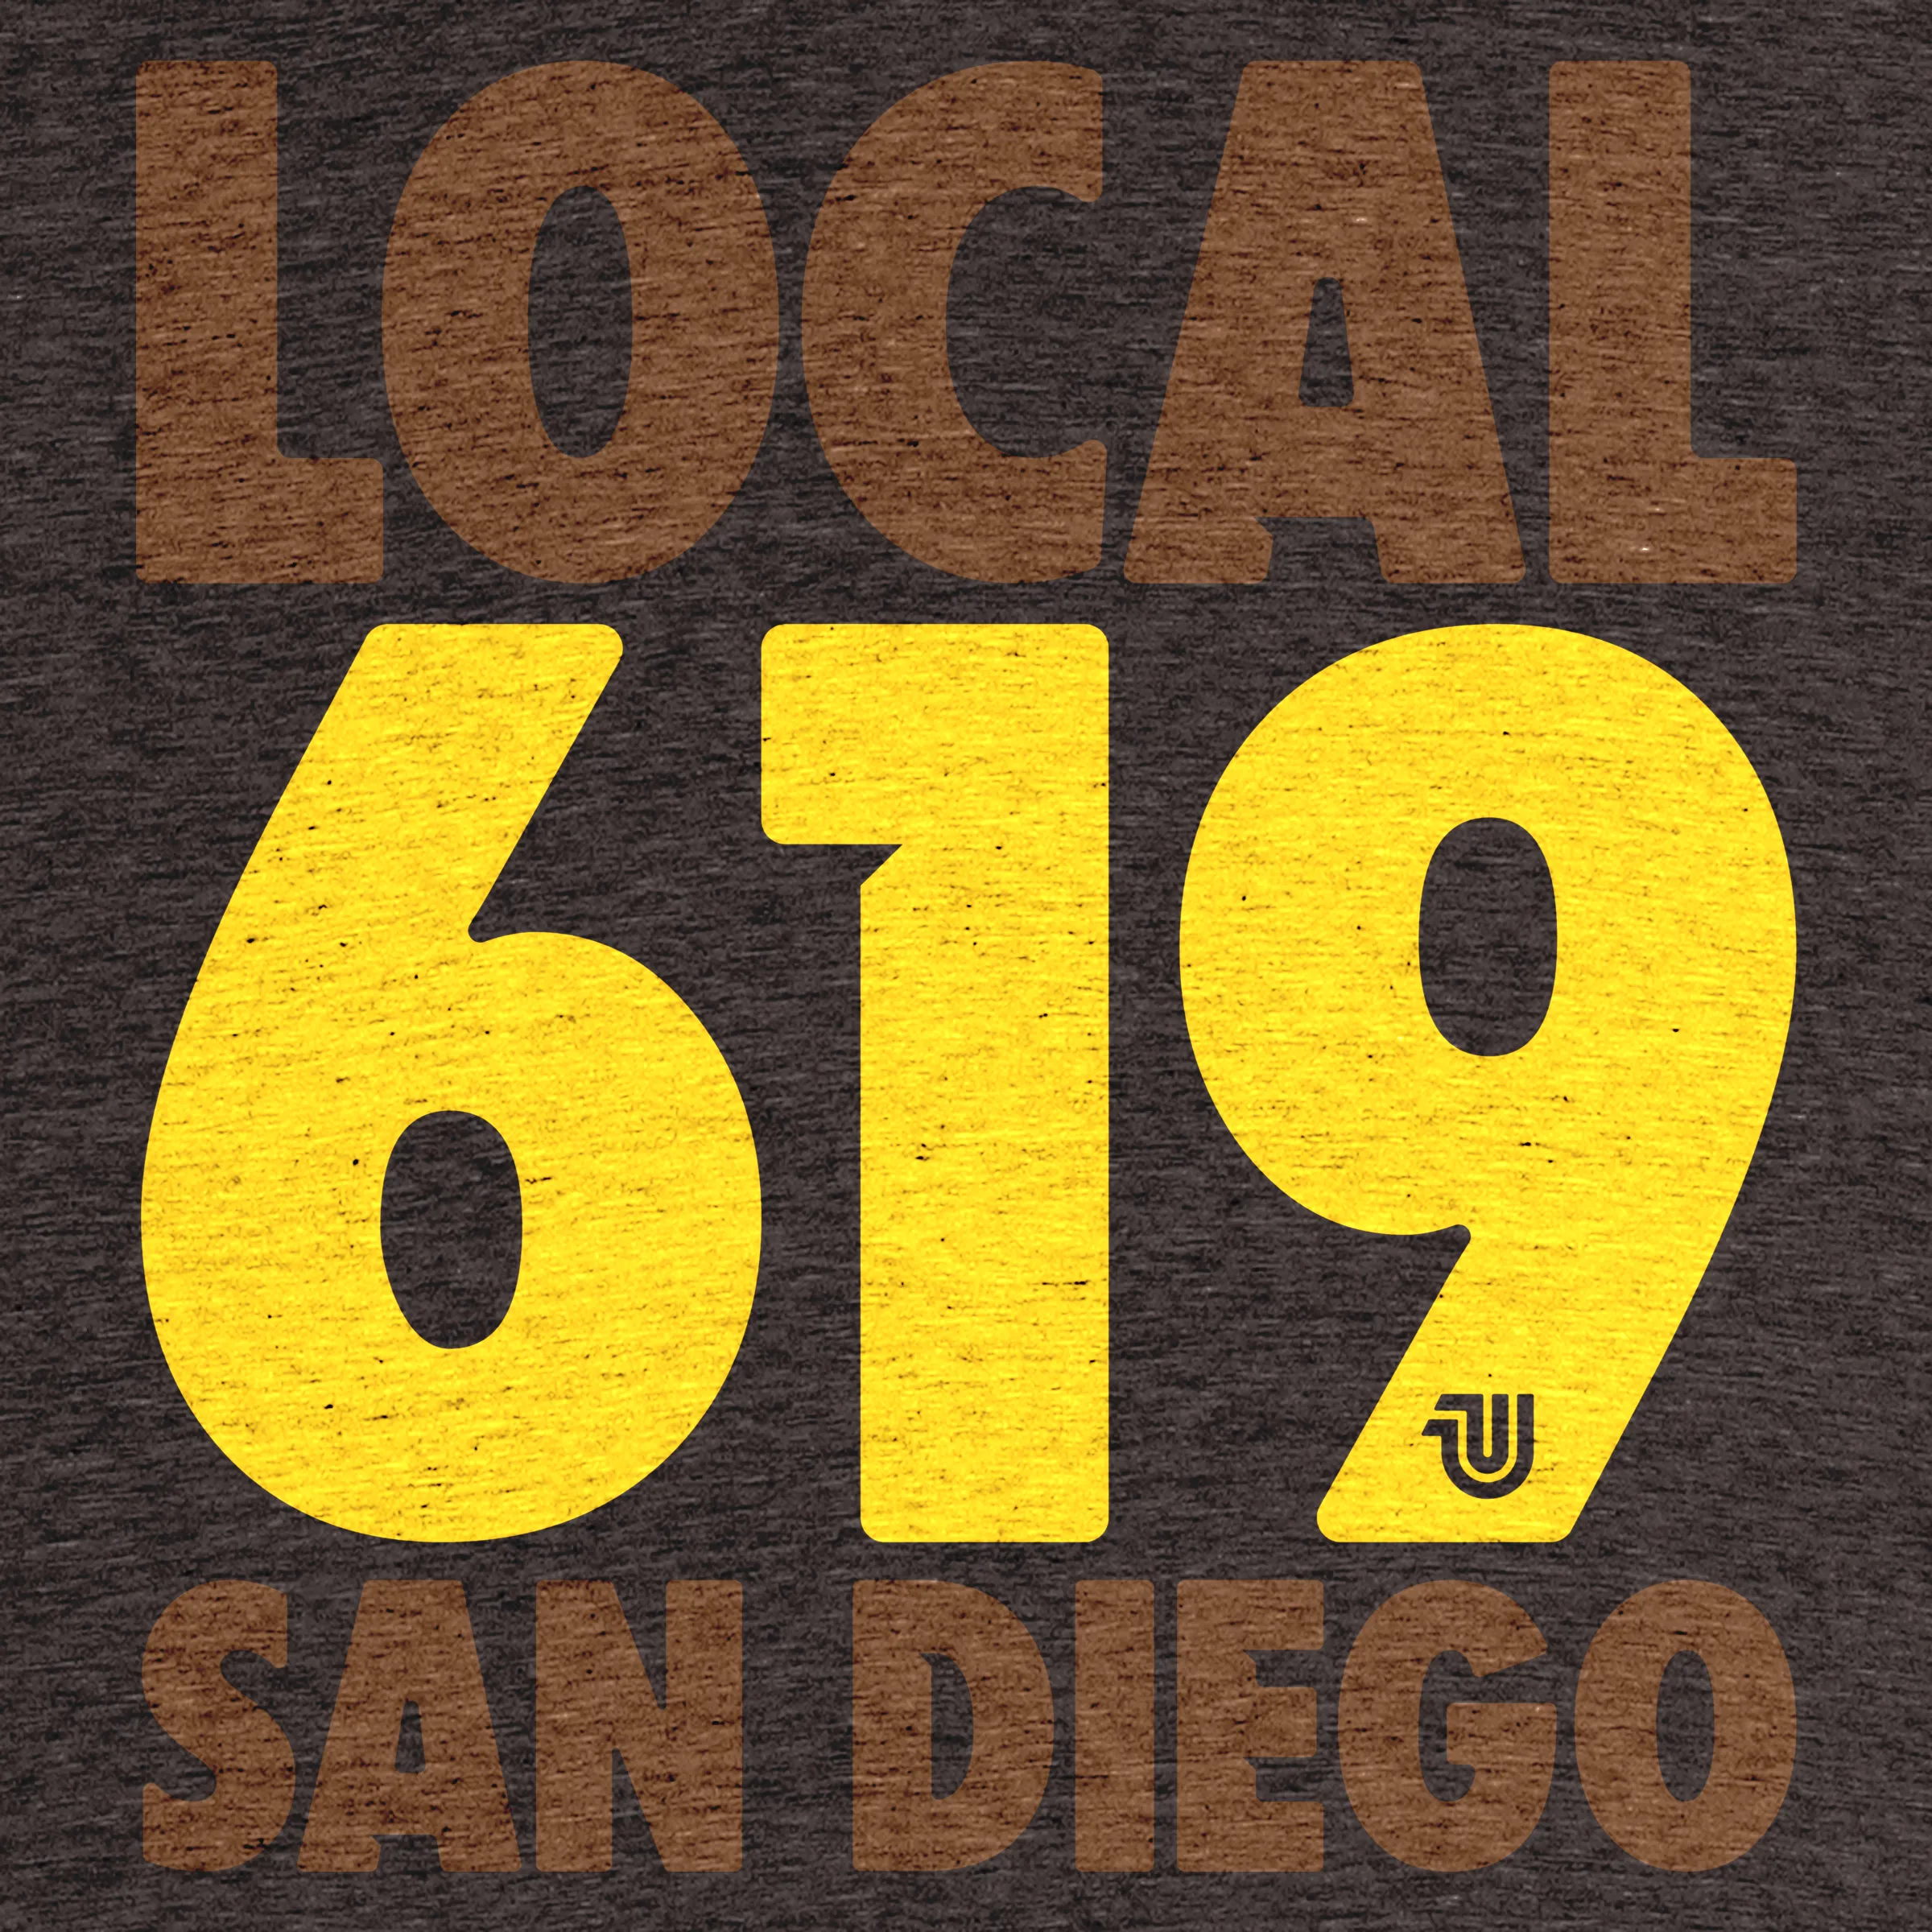 San Diego Local 619 — Futura Colors Edition” graphic tee, pullover